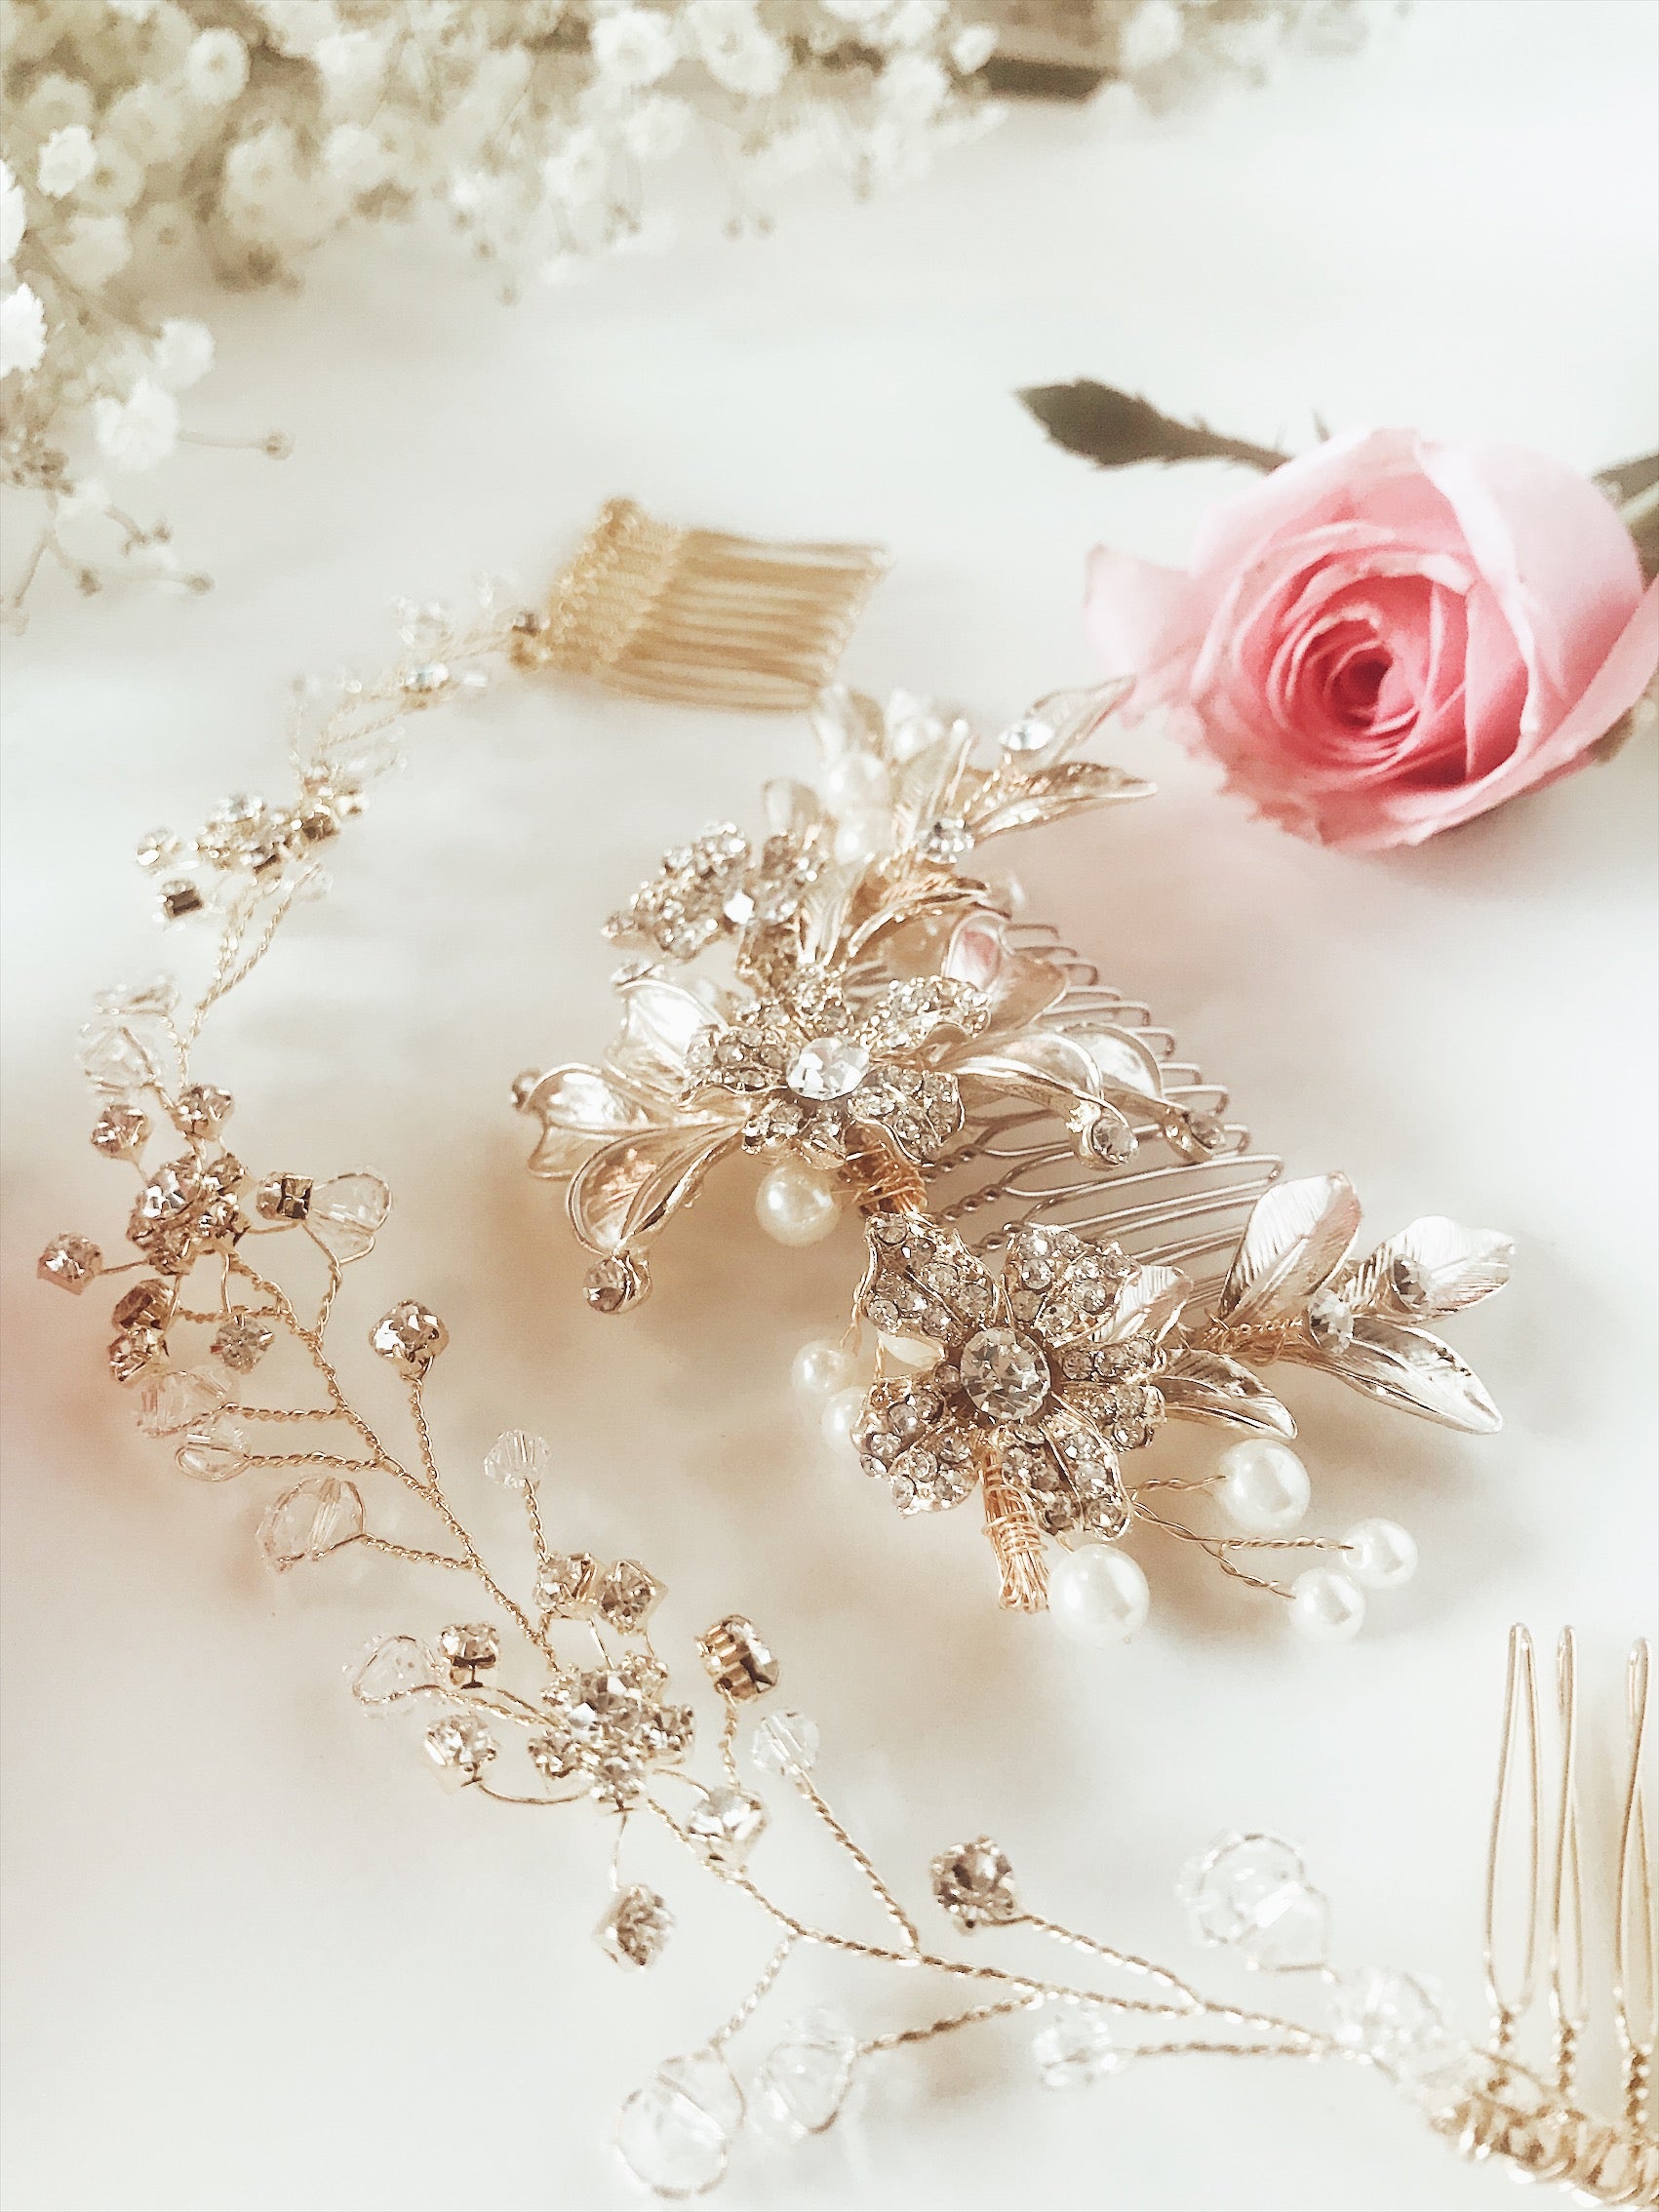 Swarovski crystal and gold floral hair vine tiara from the Lauren Elaine curated accessories collections for weddings